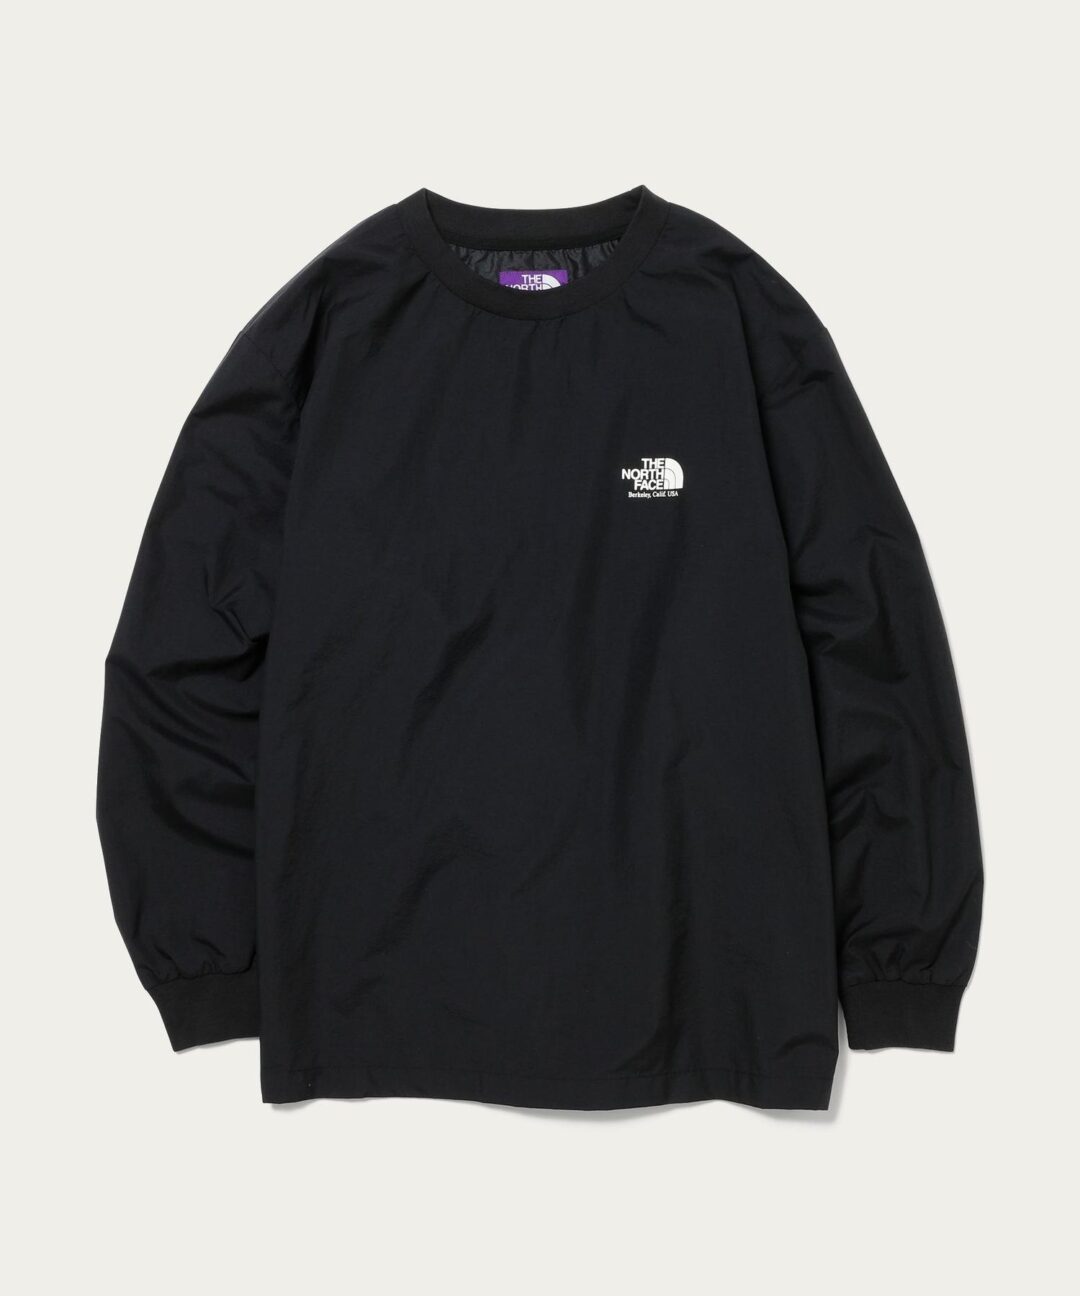 THE NORTH FACE PURPLE LABEL × BEAUTY&YOUTH 別注 L/S LOGO TEEが2月 